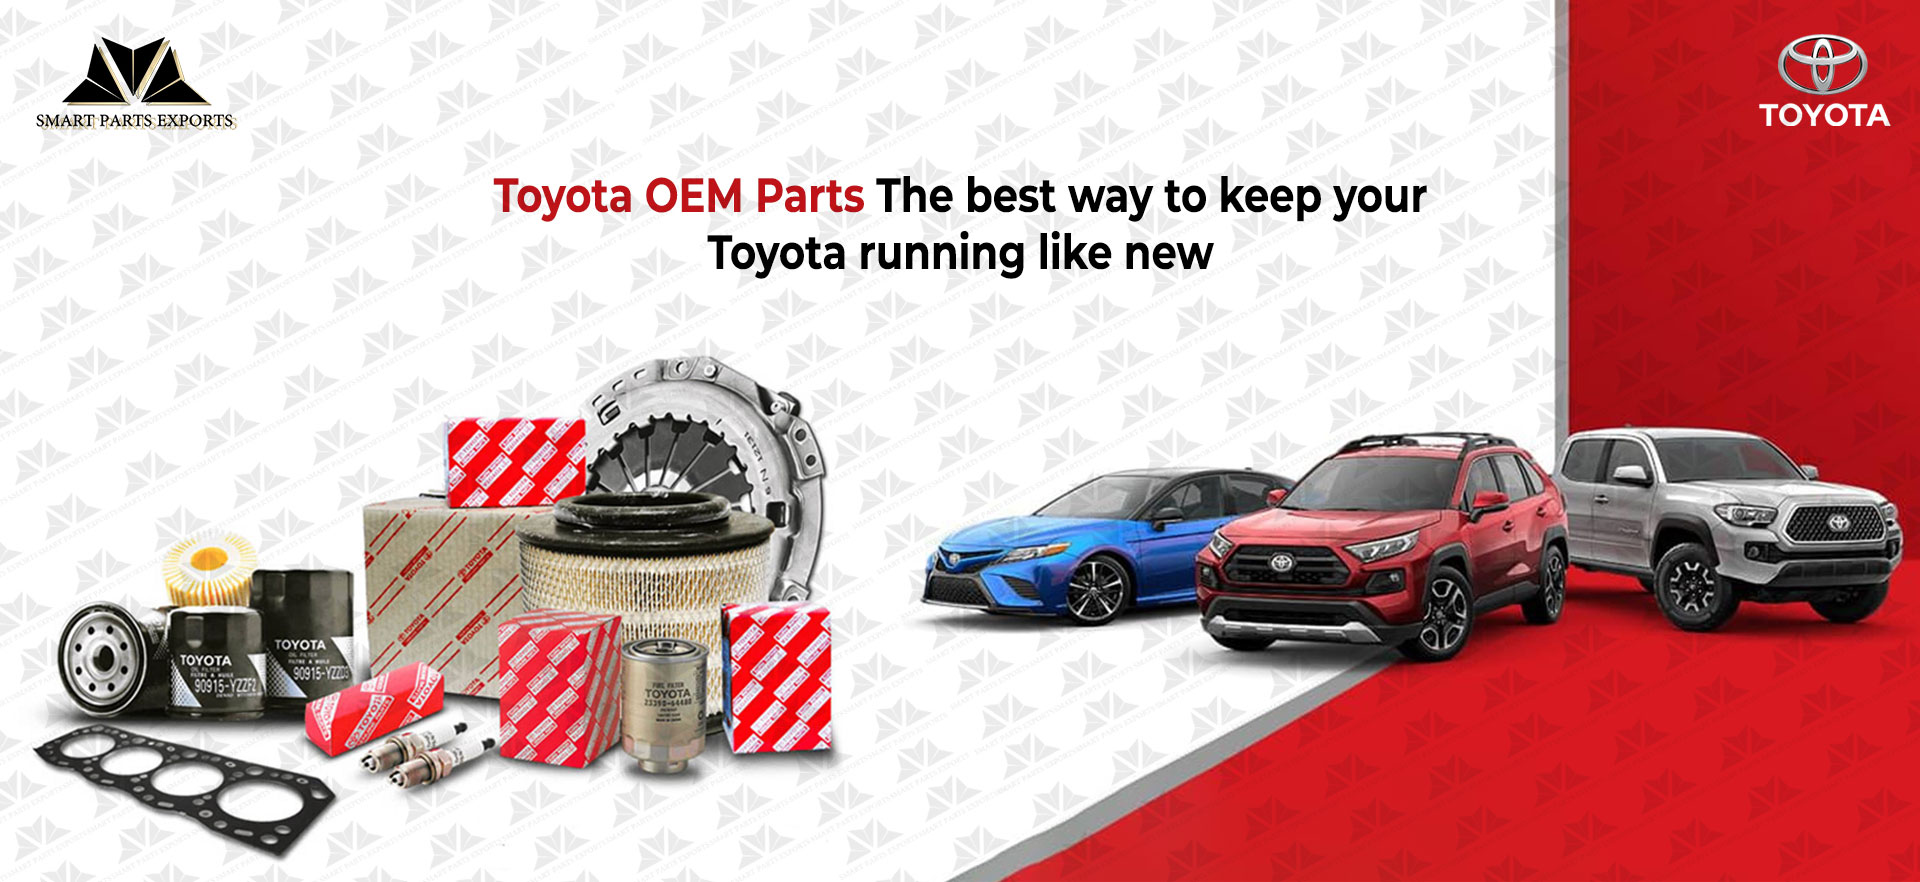 Toyota OEM Parts - The best way to keep your Toyota running like new